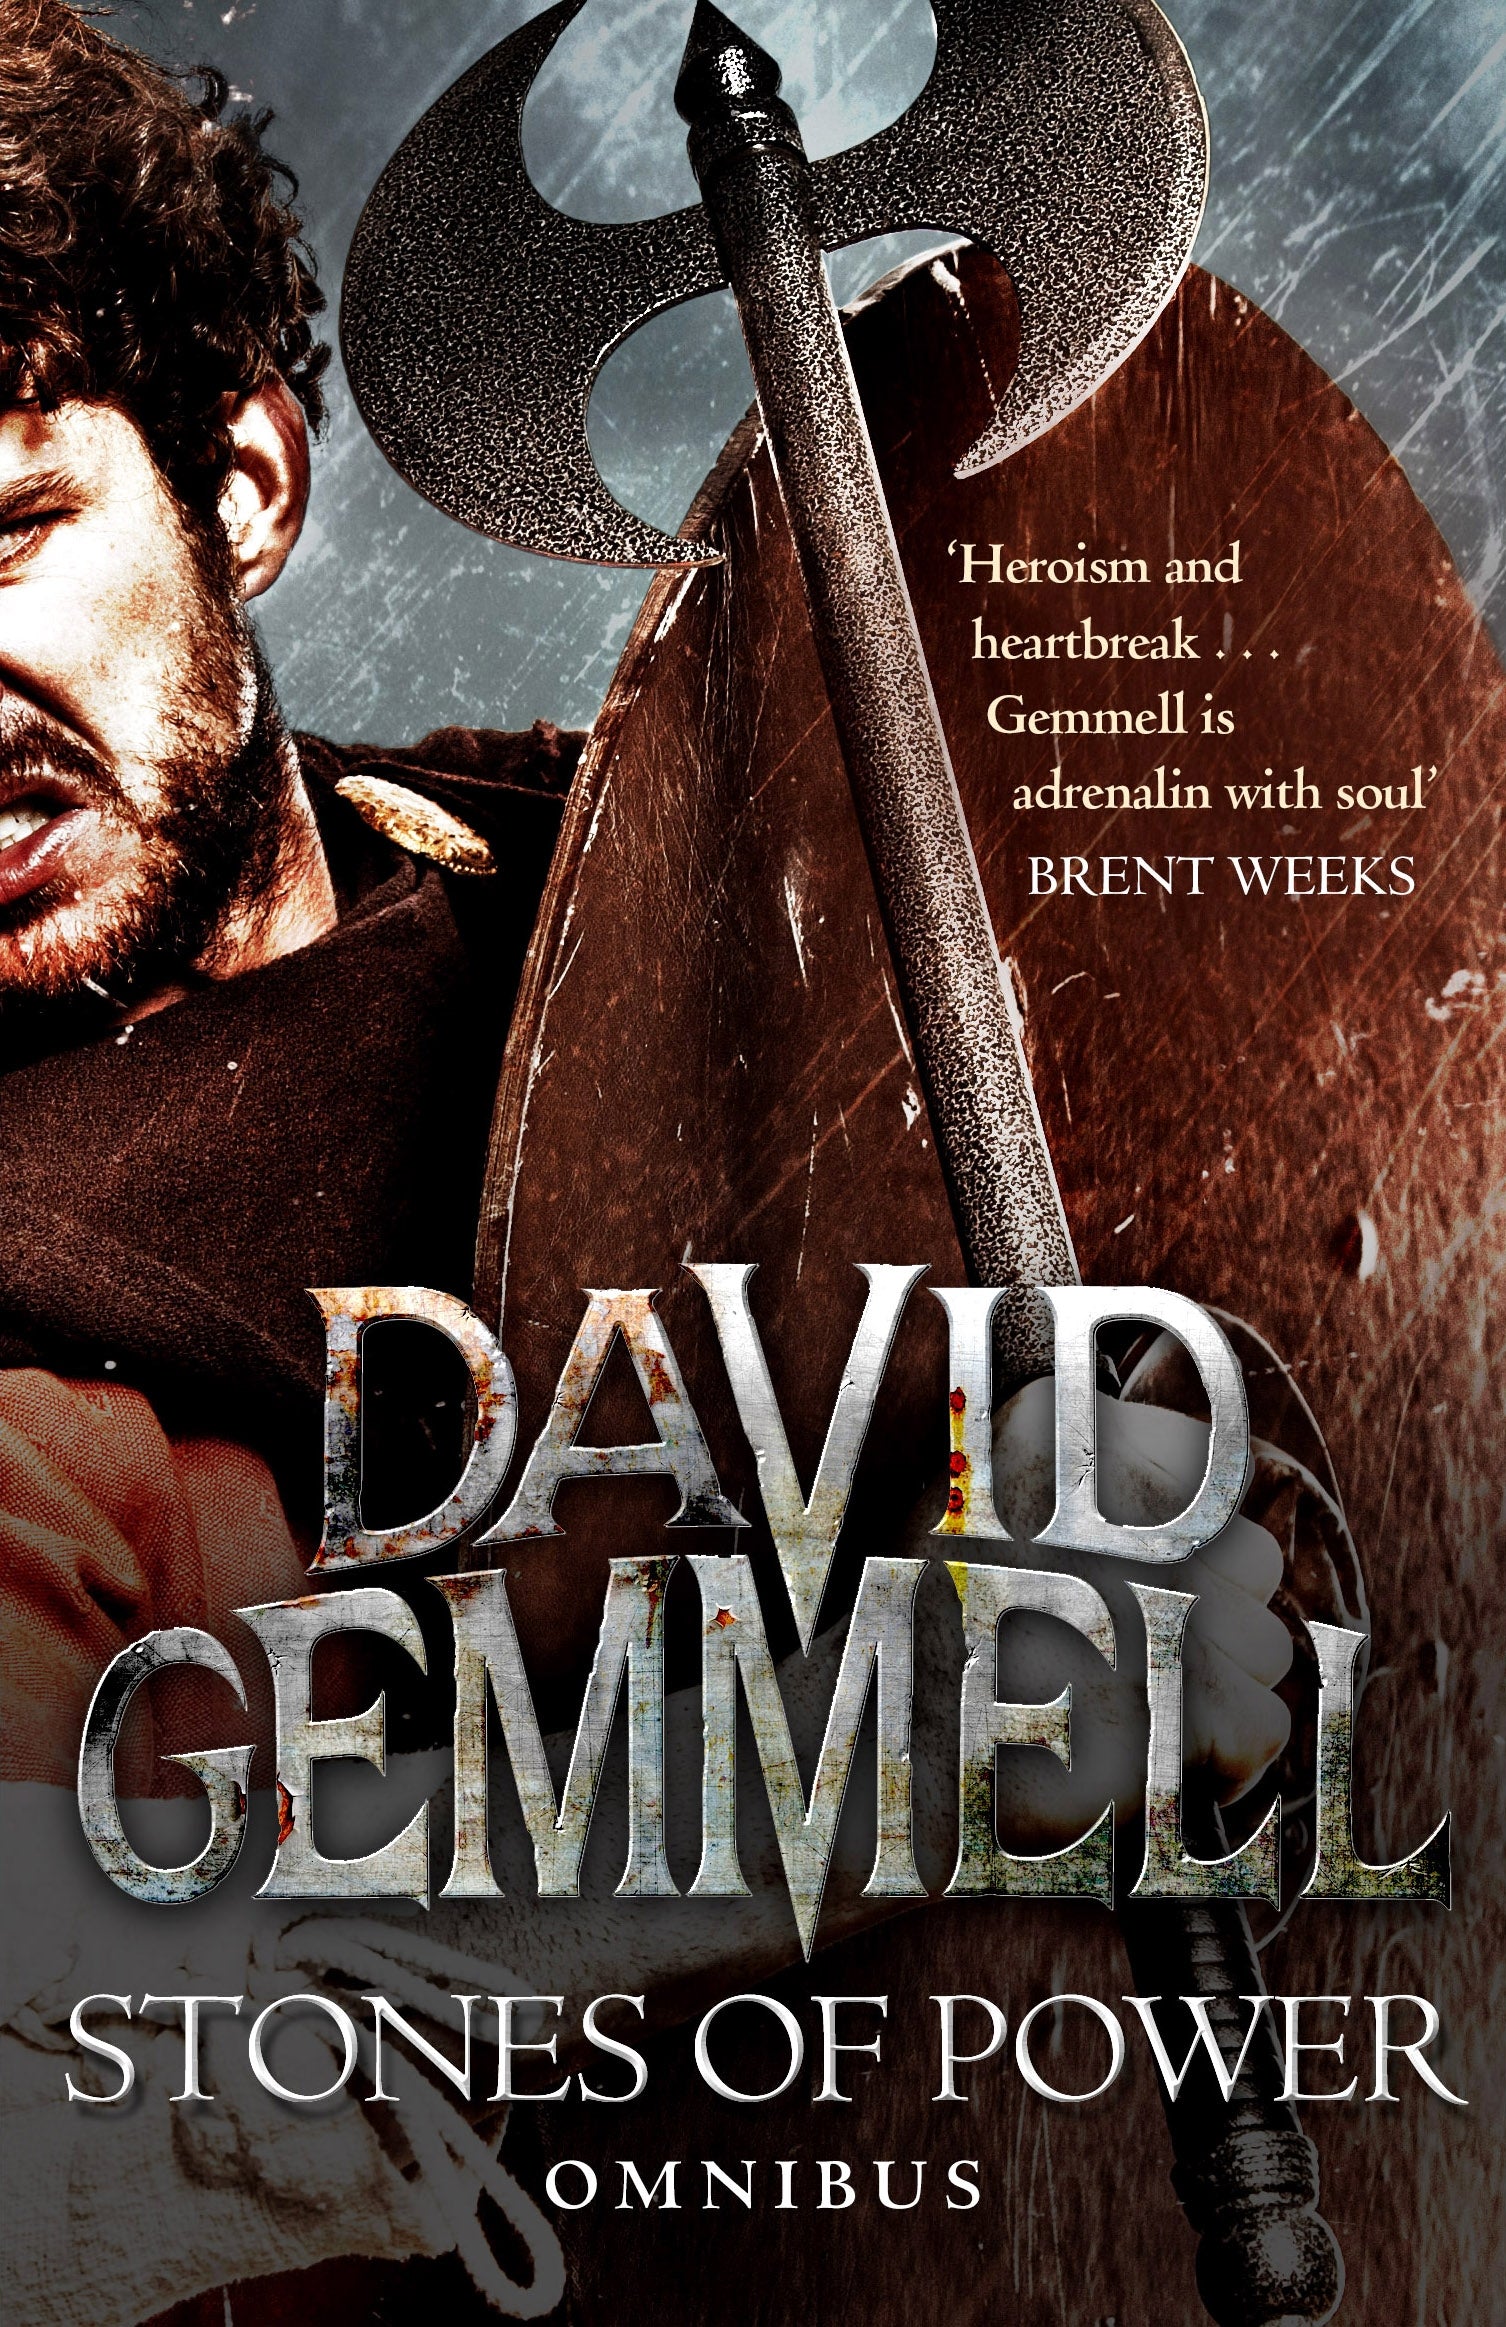 Stones of Power: The Omnibus Edition by David Gemmell